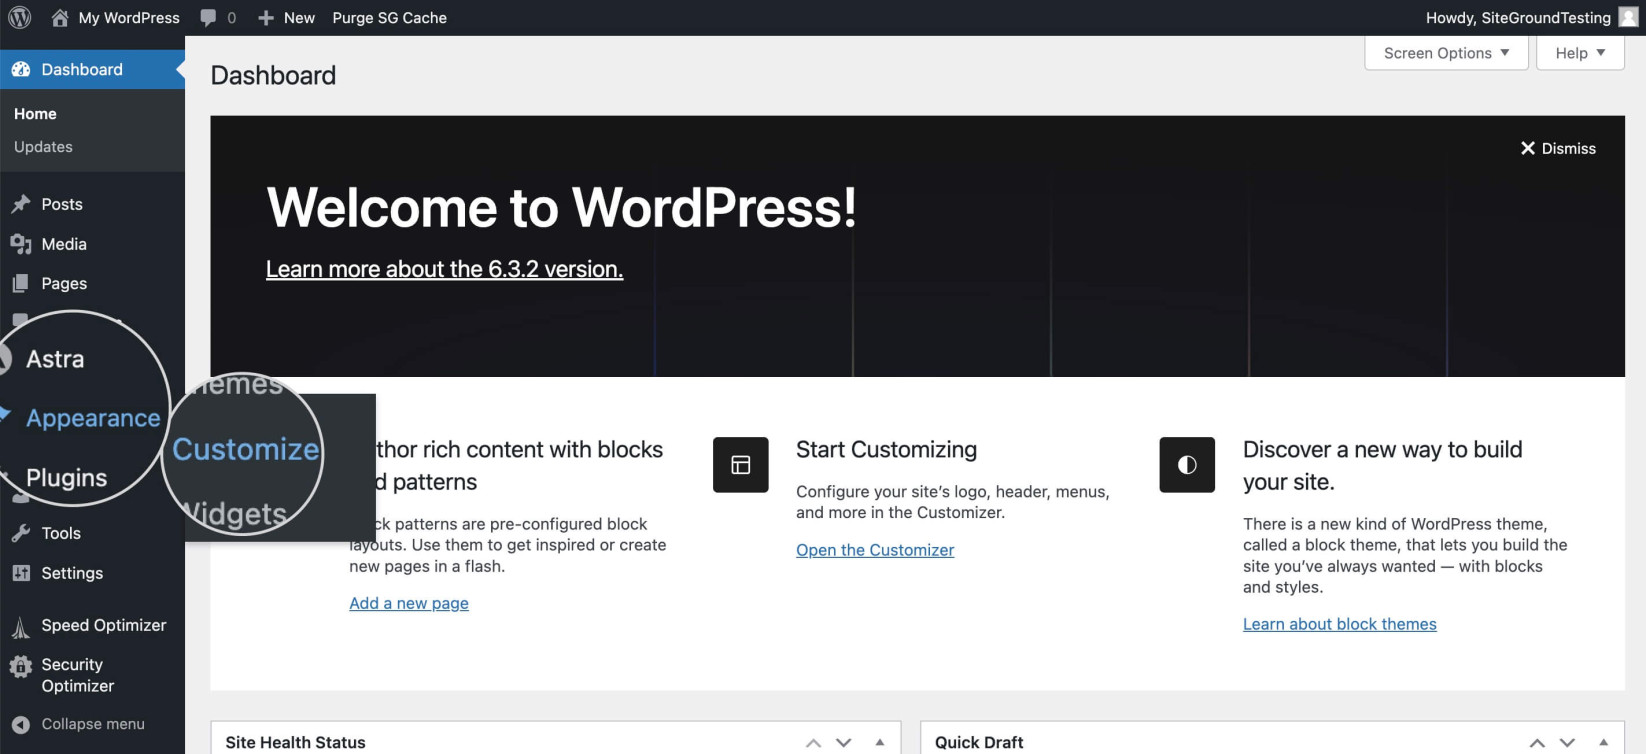 Screenshot showing where to find the Appearance Customize option in WordPress to customize your theme